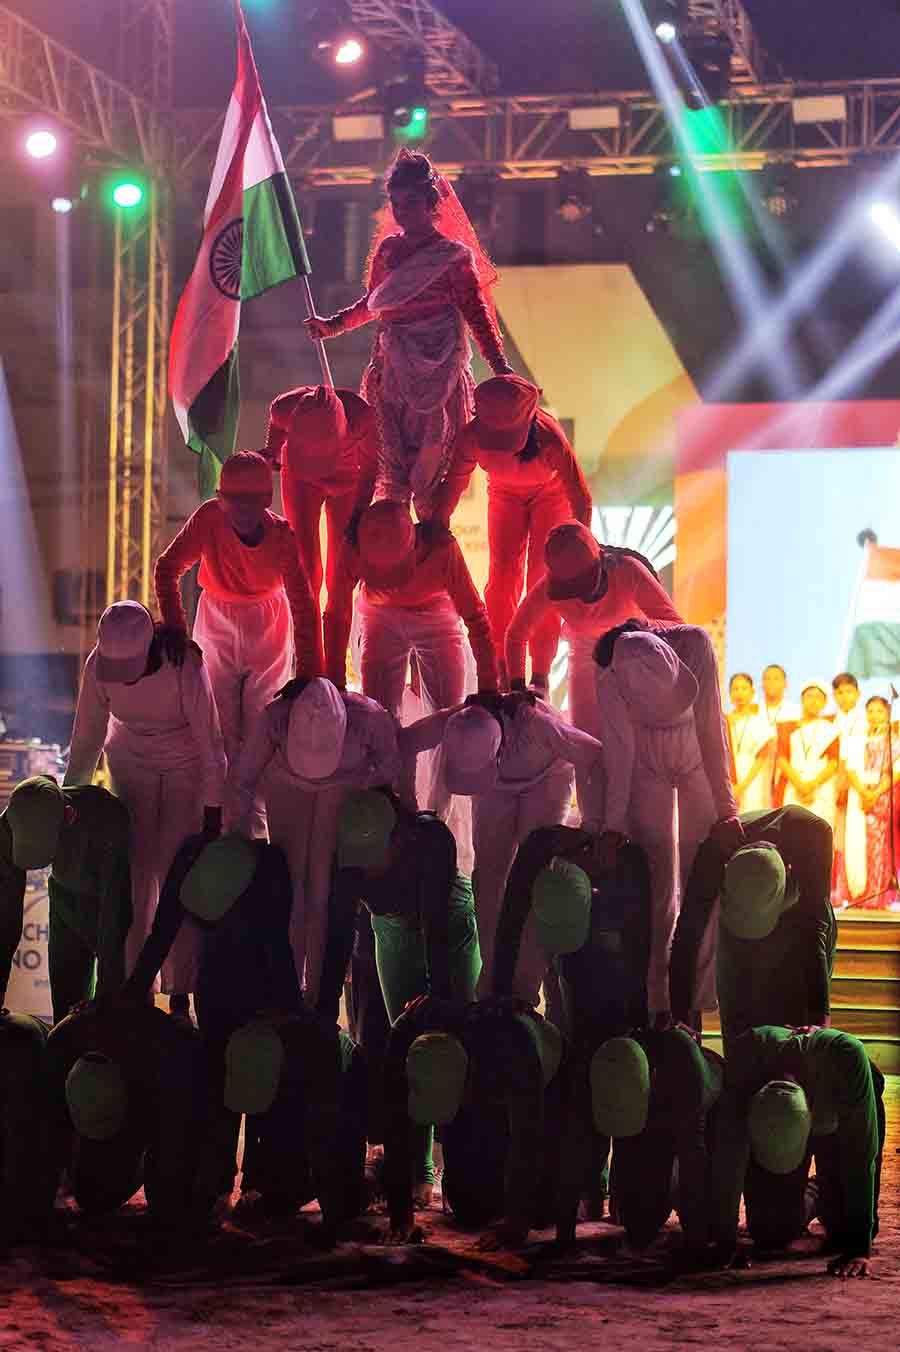 The most impressive part of the performance was the human pyramid made in the formation of the Indian tricolour to depict the theme of Techno Olympica Knights: ‘Teamwork makes Dreamwork’